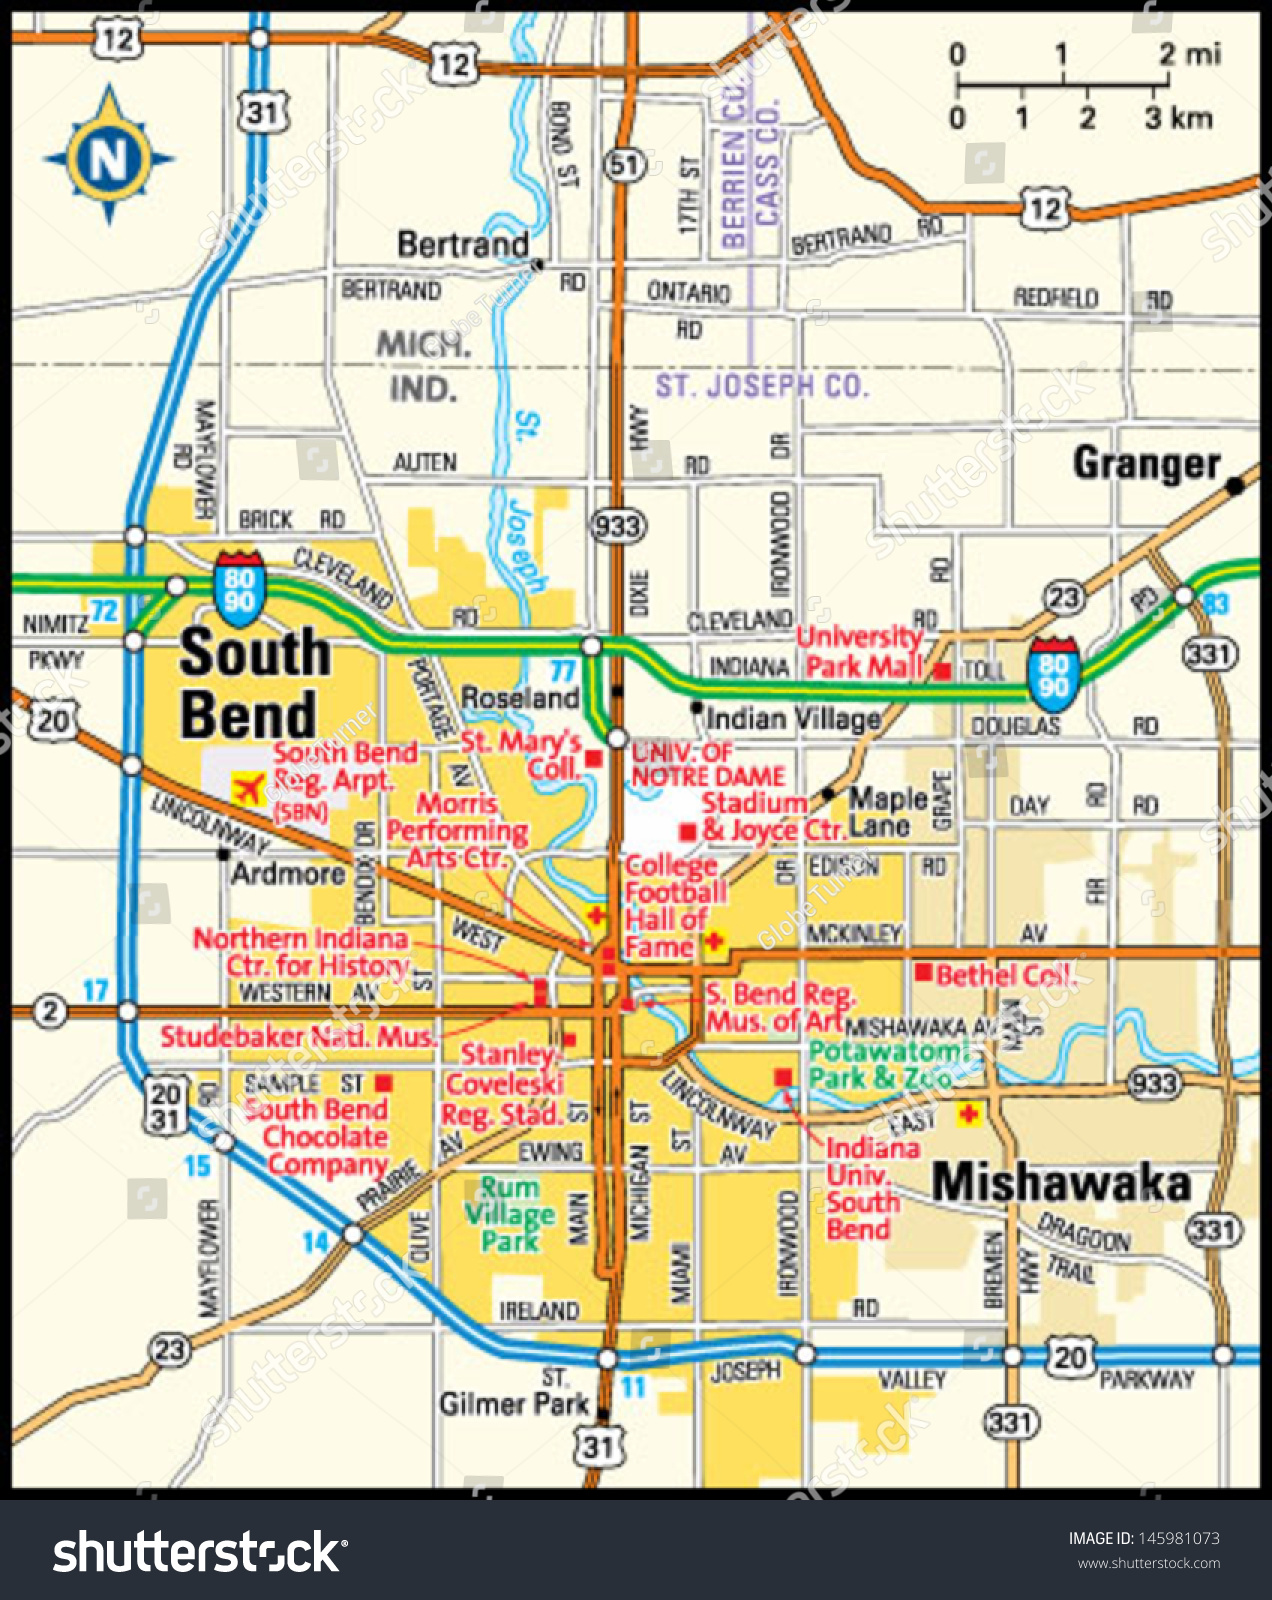 South Bend Indiana On A Map South Bend Indiana Area Map Stock Vector (Royalty Free) 145981073 |  Shutterstock